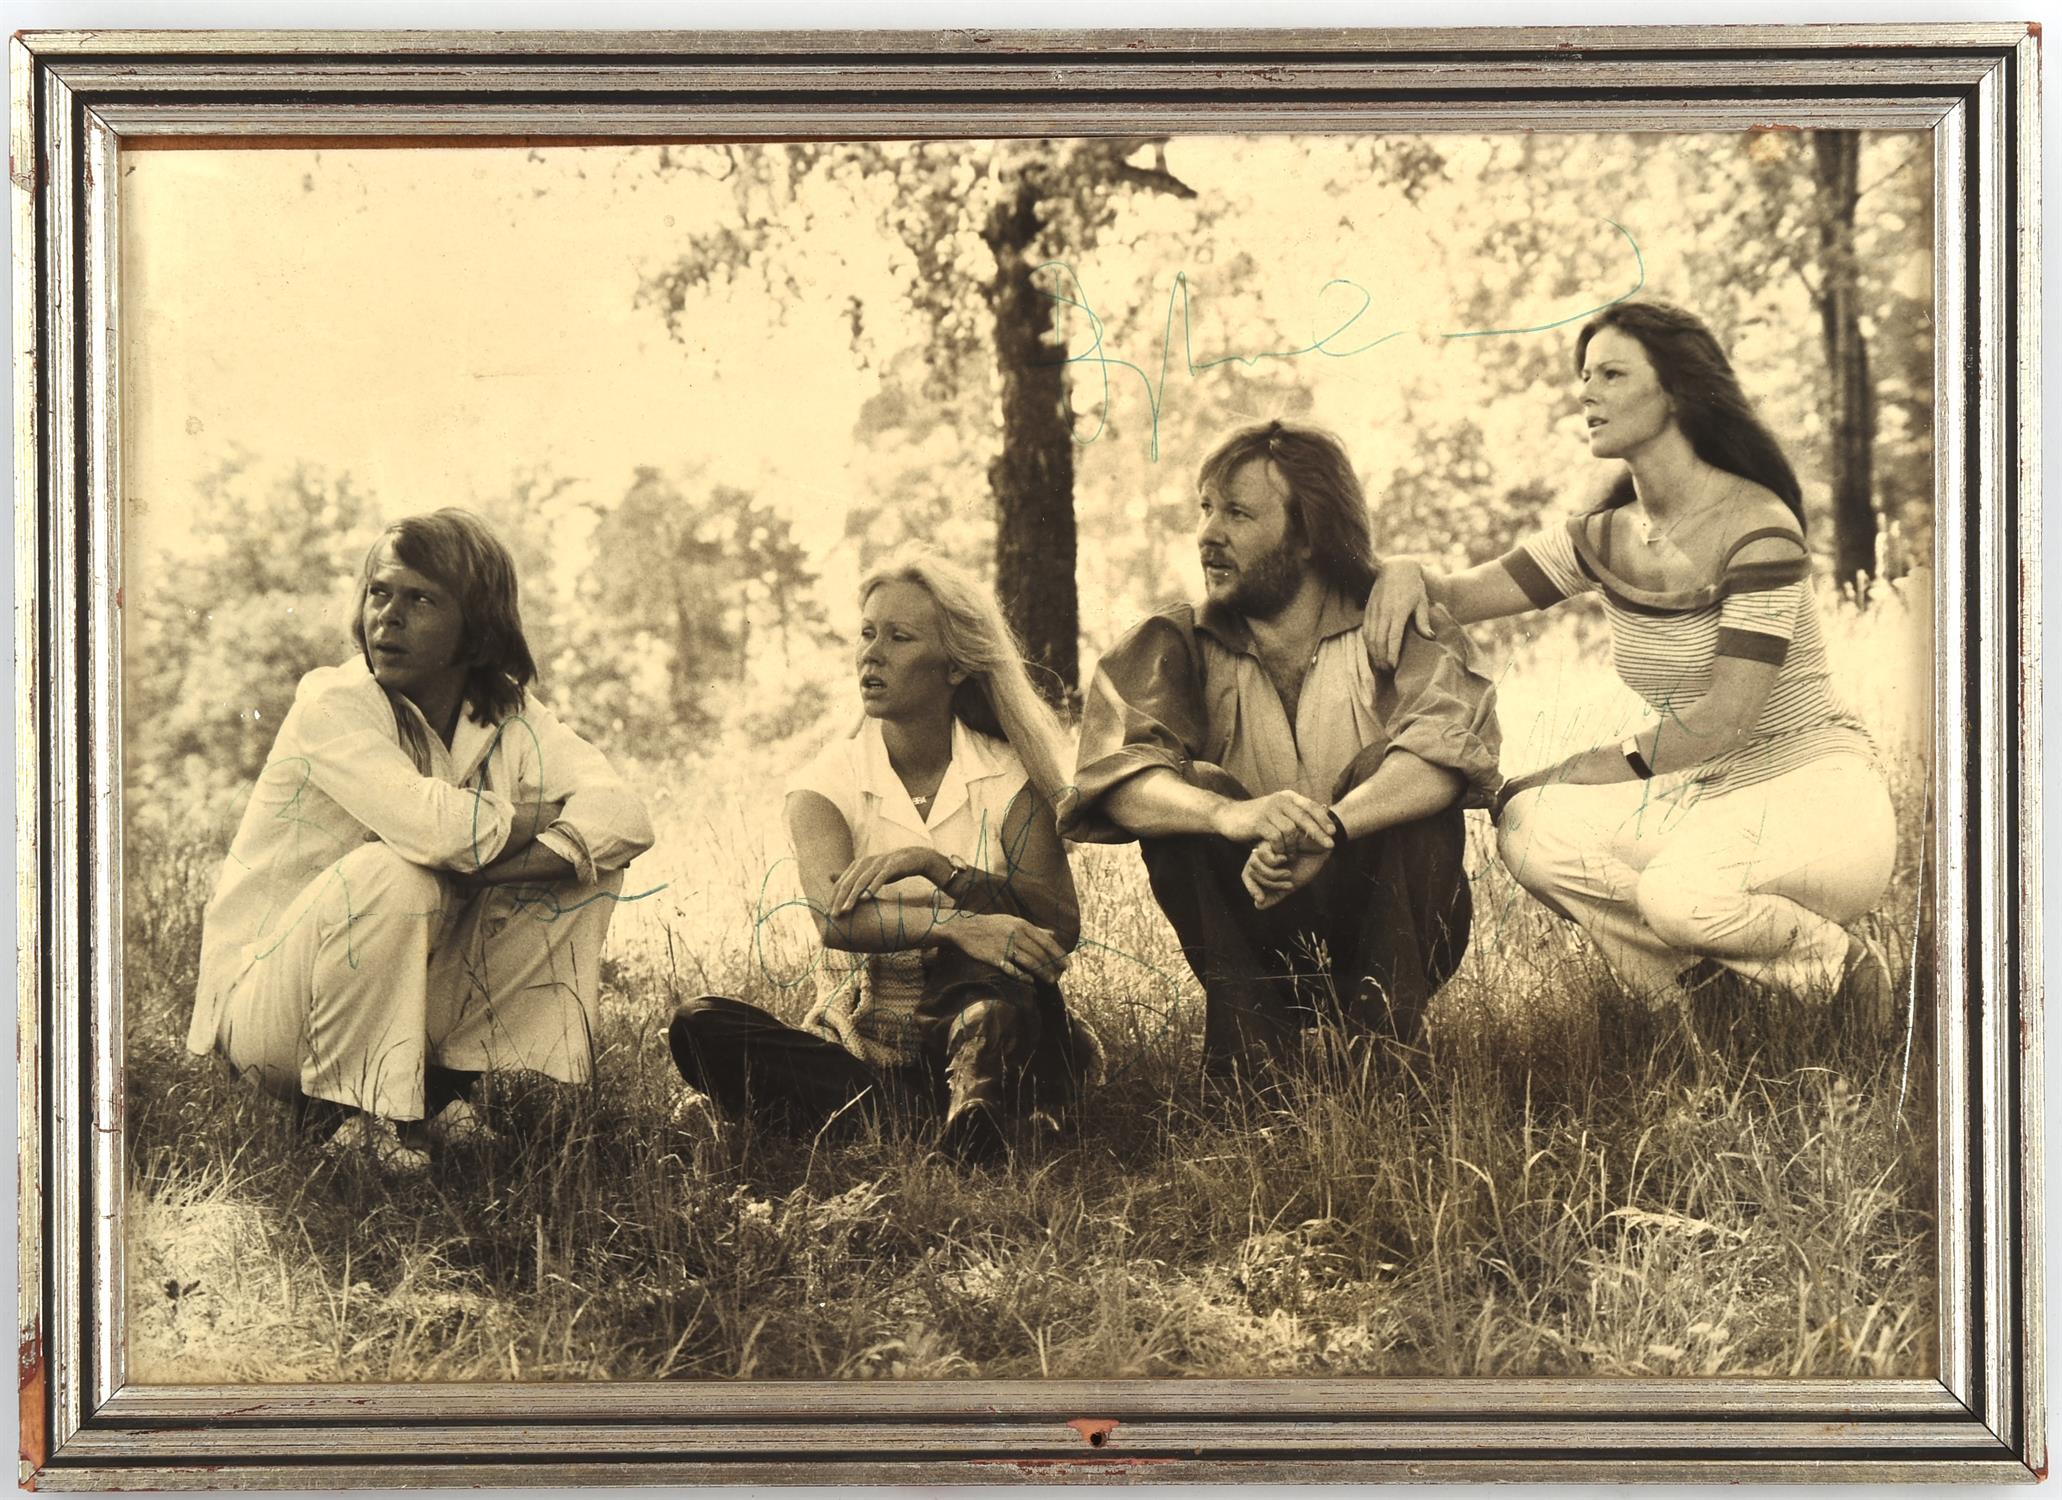 ABBA – Autographed black and white promotional still, depicted the band in a rural setting.